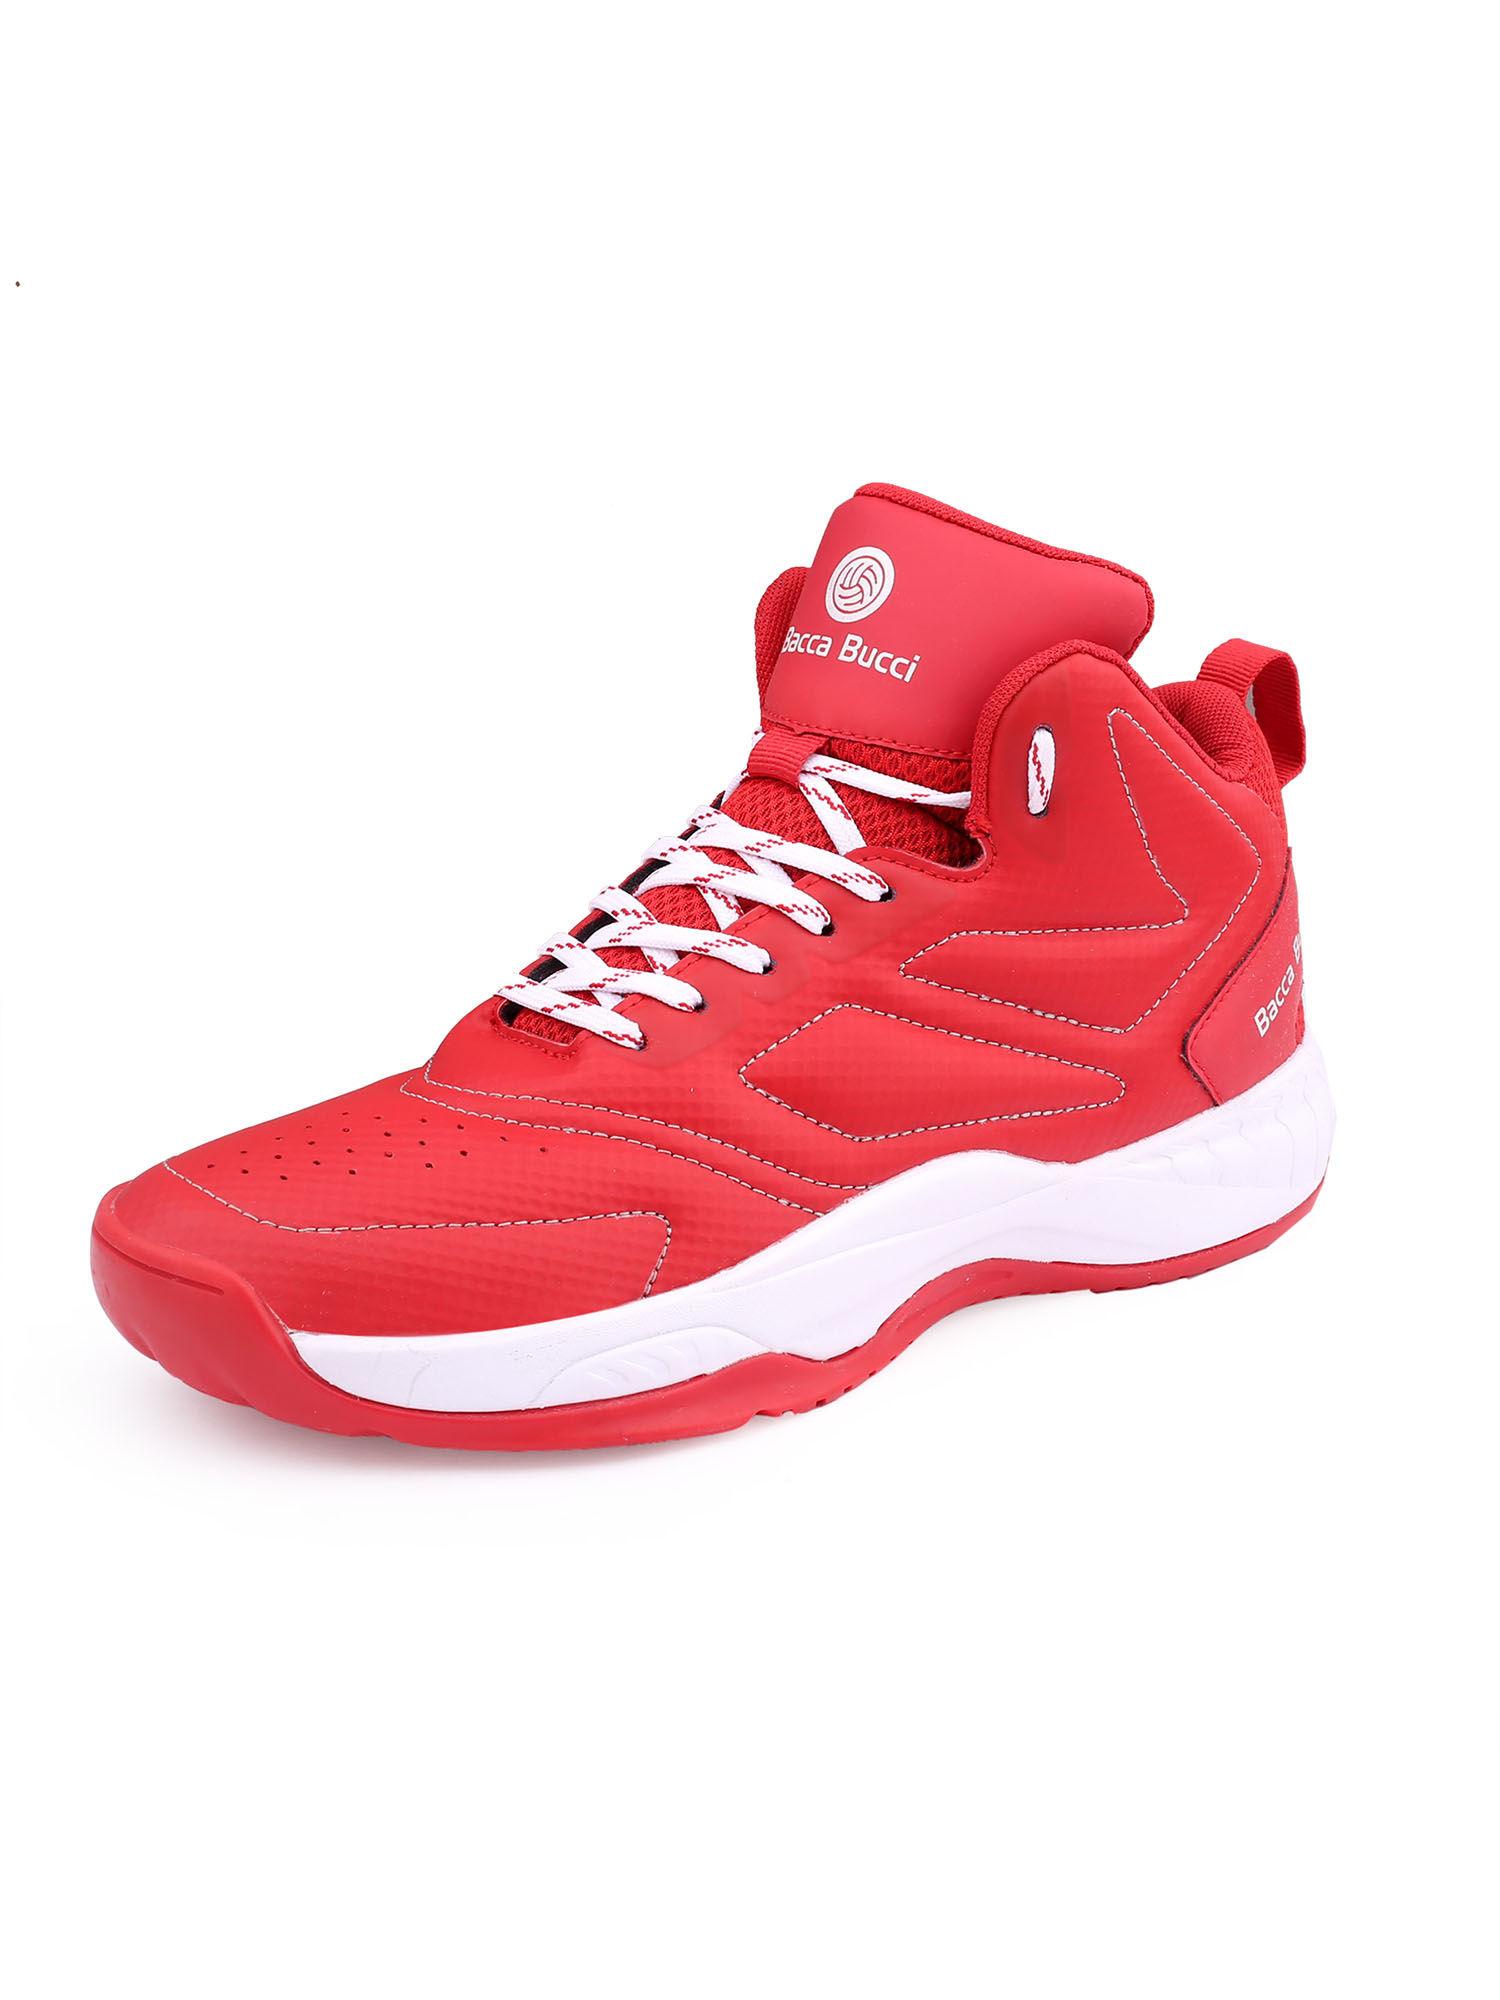 courtflex all court high top basketball shoes